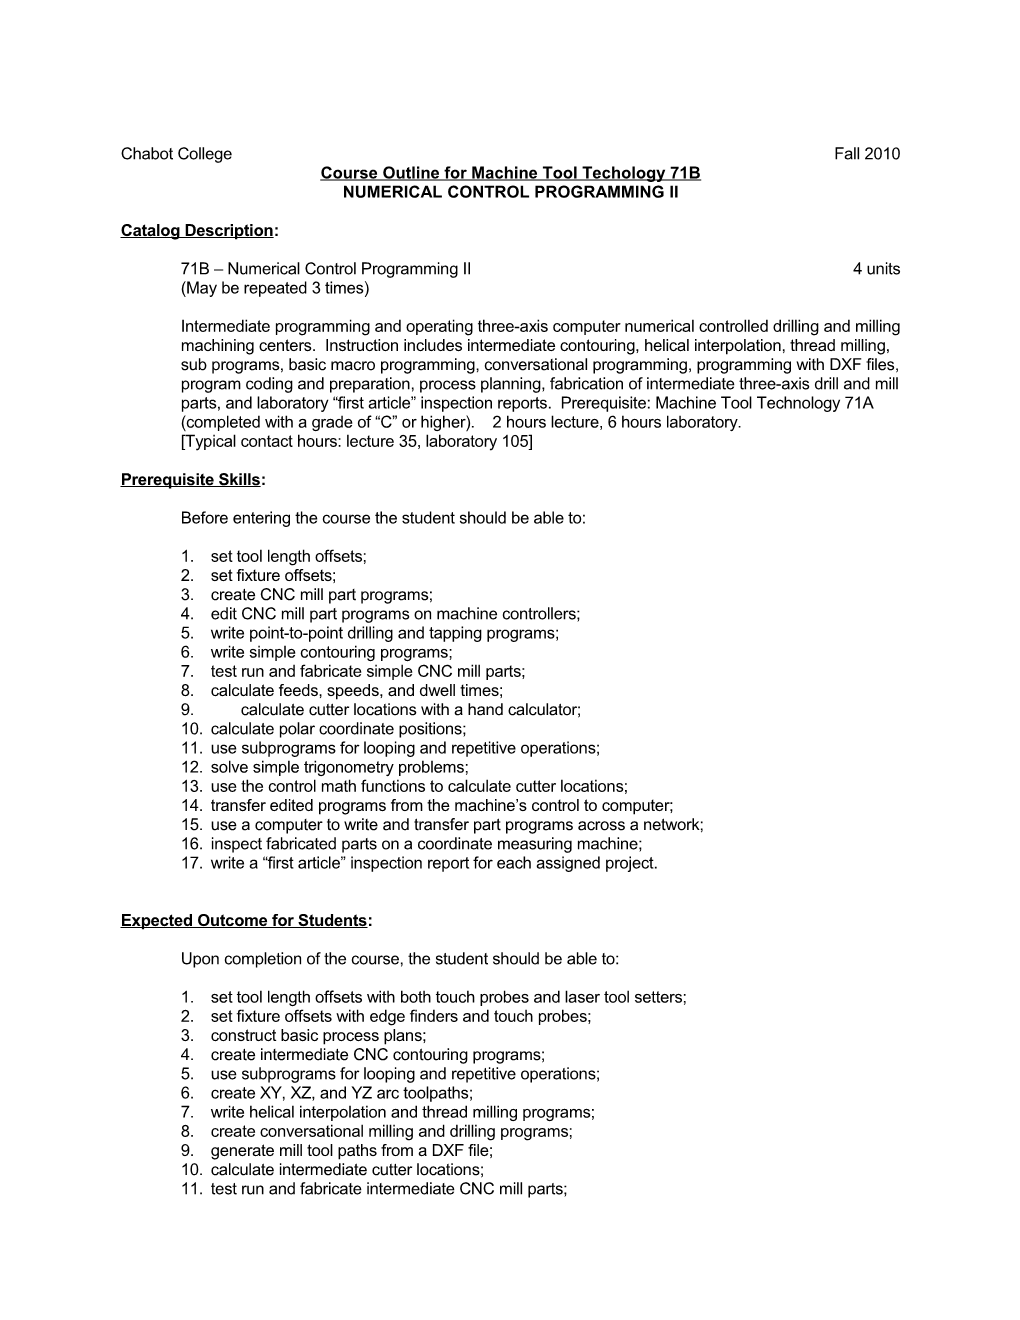 Course Outline for Machine Tool Technology 71B - Page 1